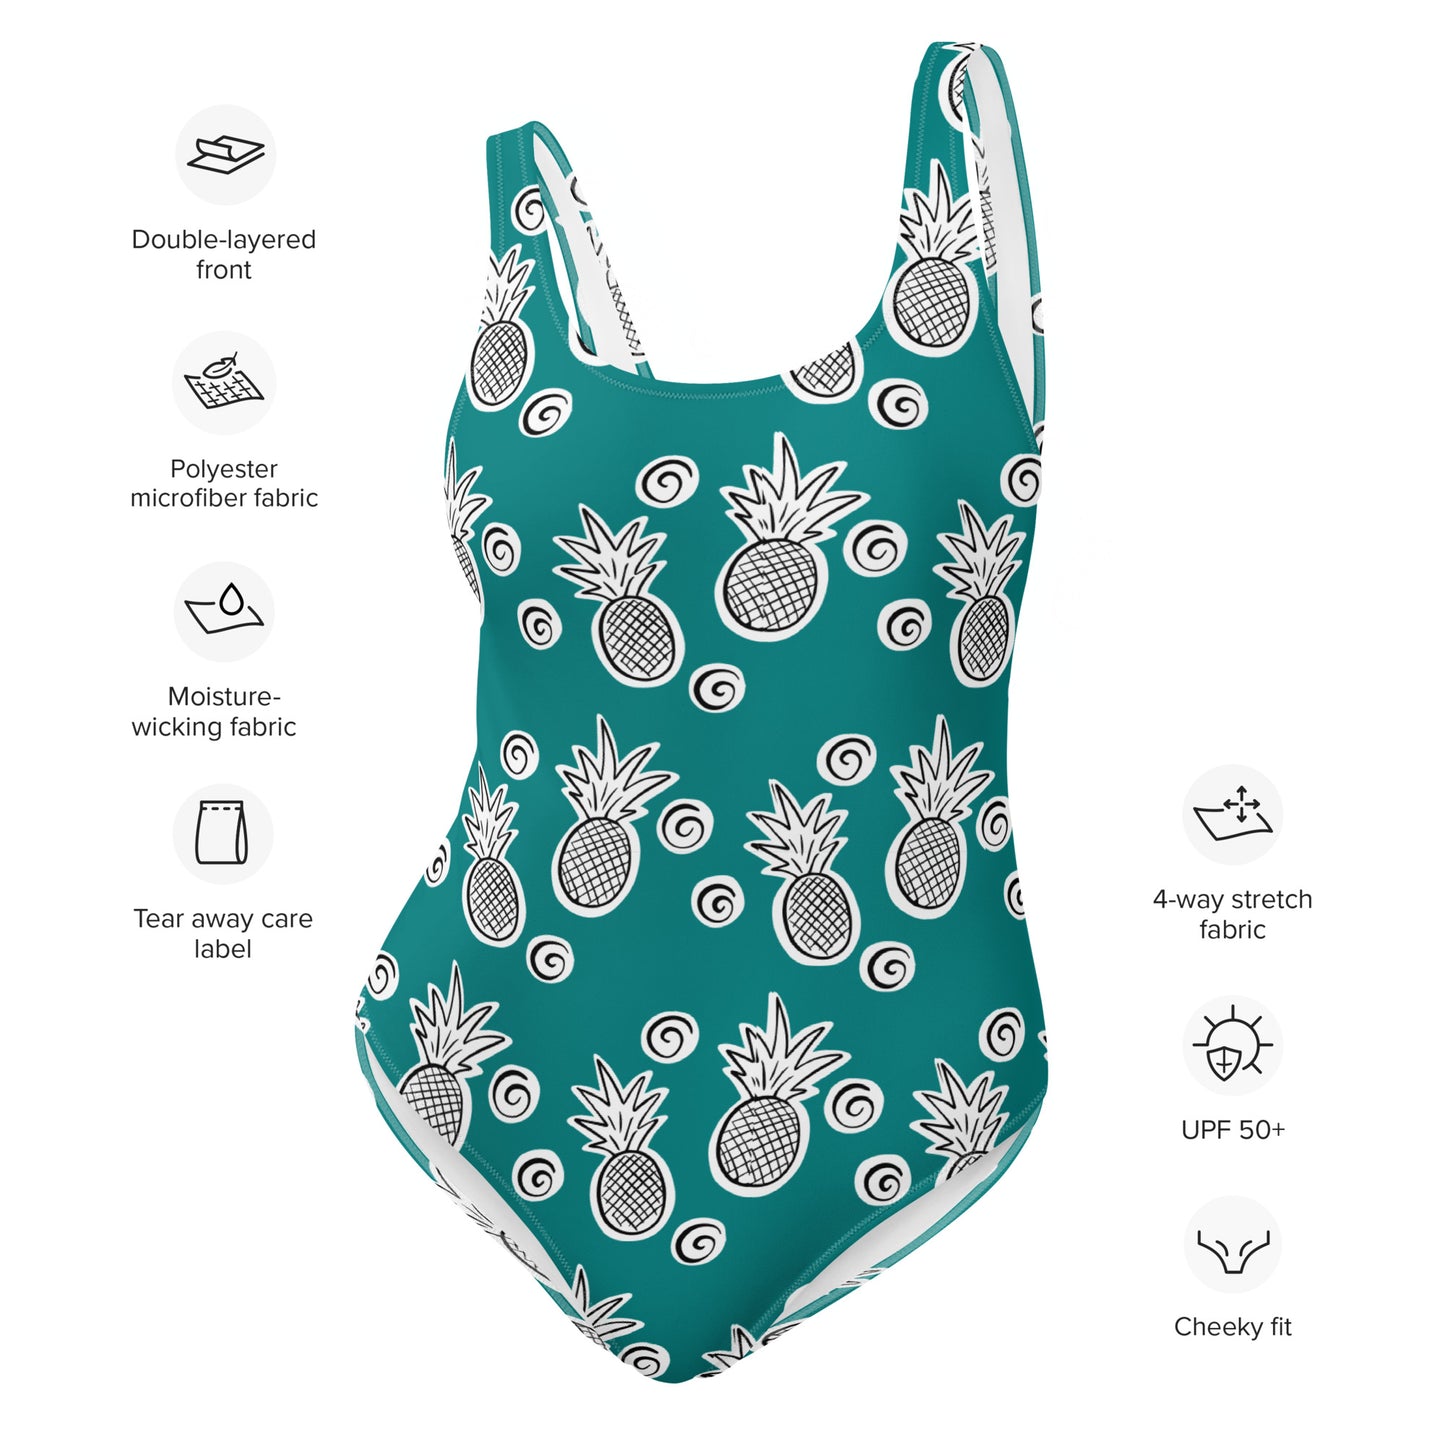 The Gymbum UK QuickDry Pineapple Dusky Teal One-Piece Swimsuit